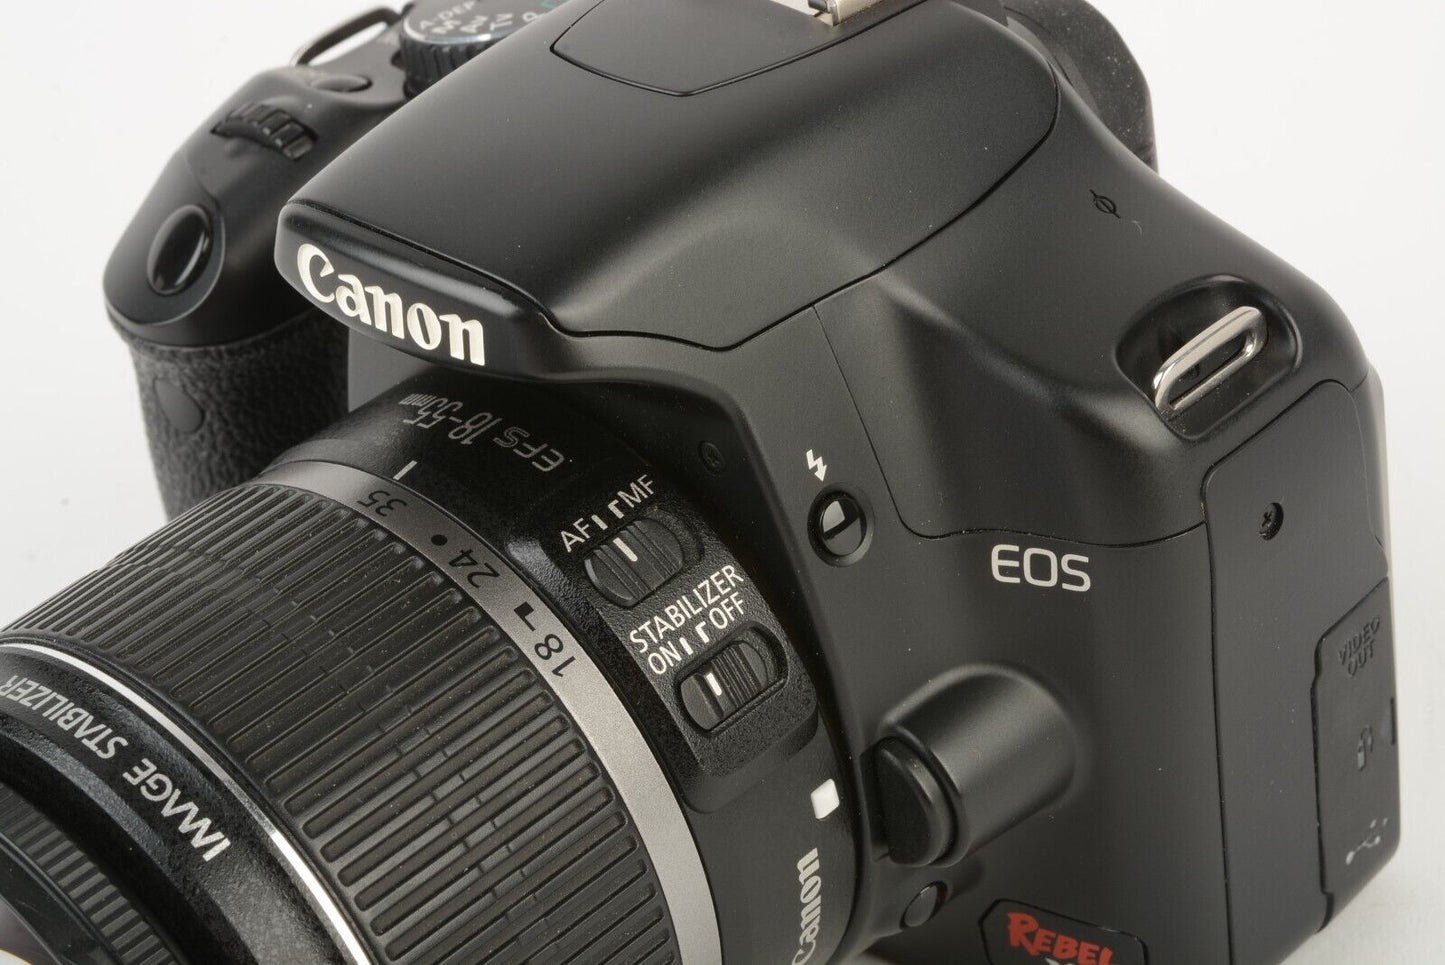 EXC++ CANON EOS REBEL XS DSLR w/18-55mm f3.5-5.6 IS 2BATTs UV +POLA, 7439 ACTS!